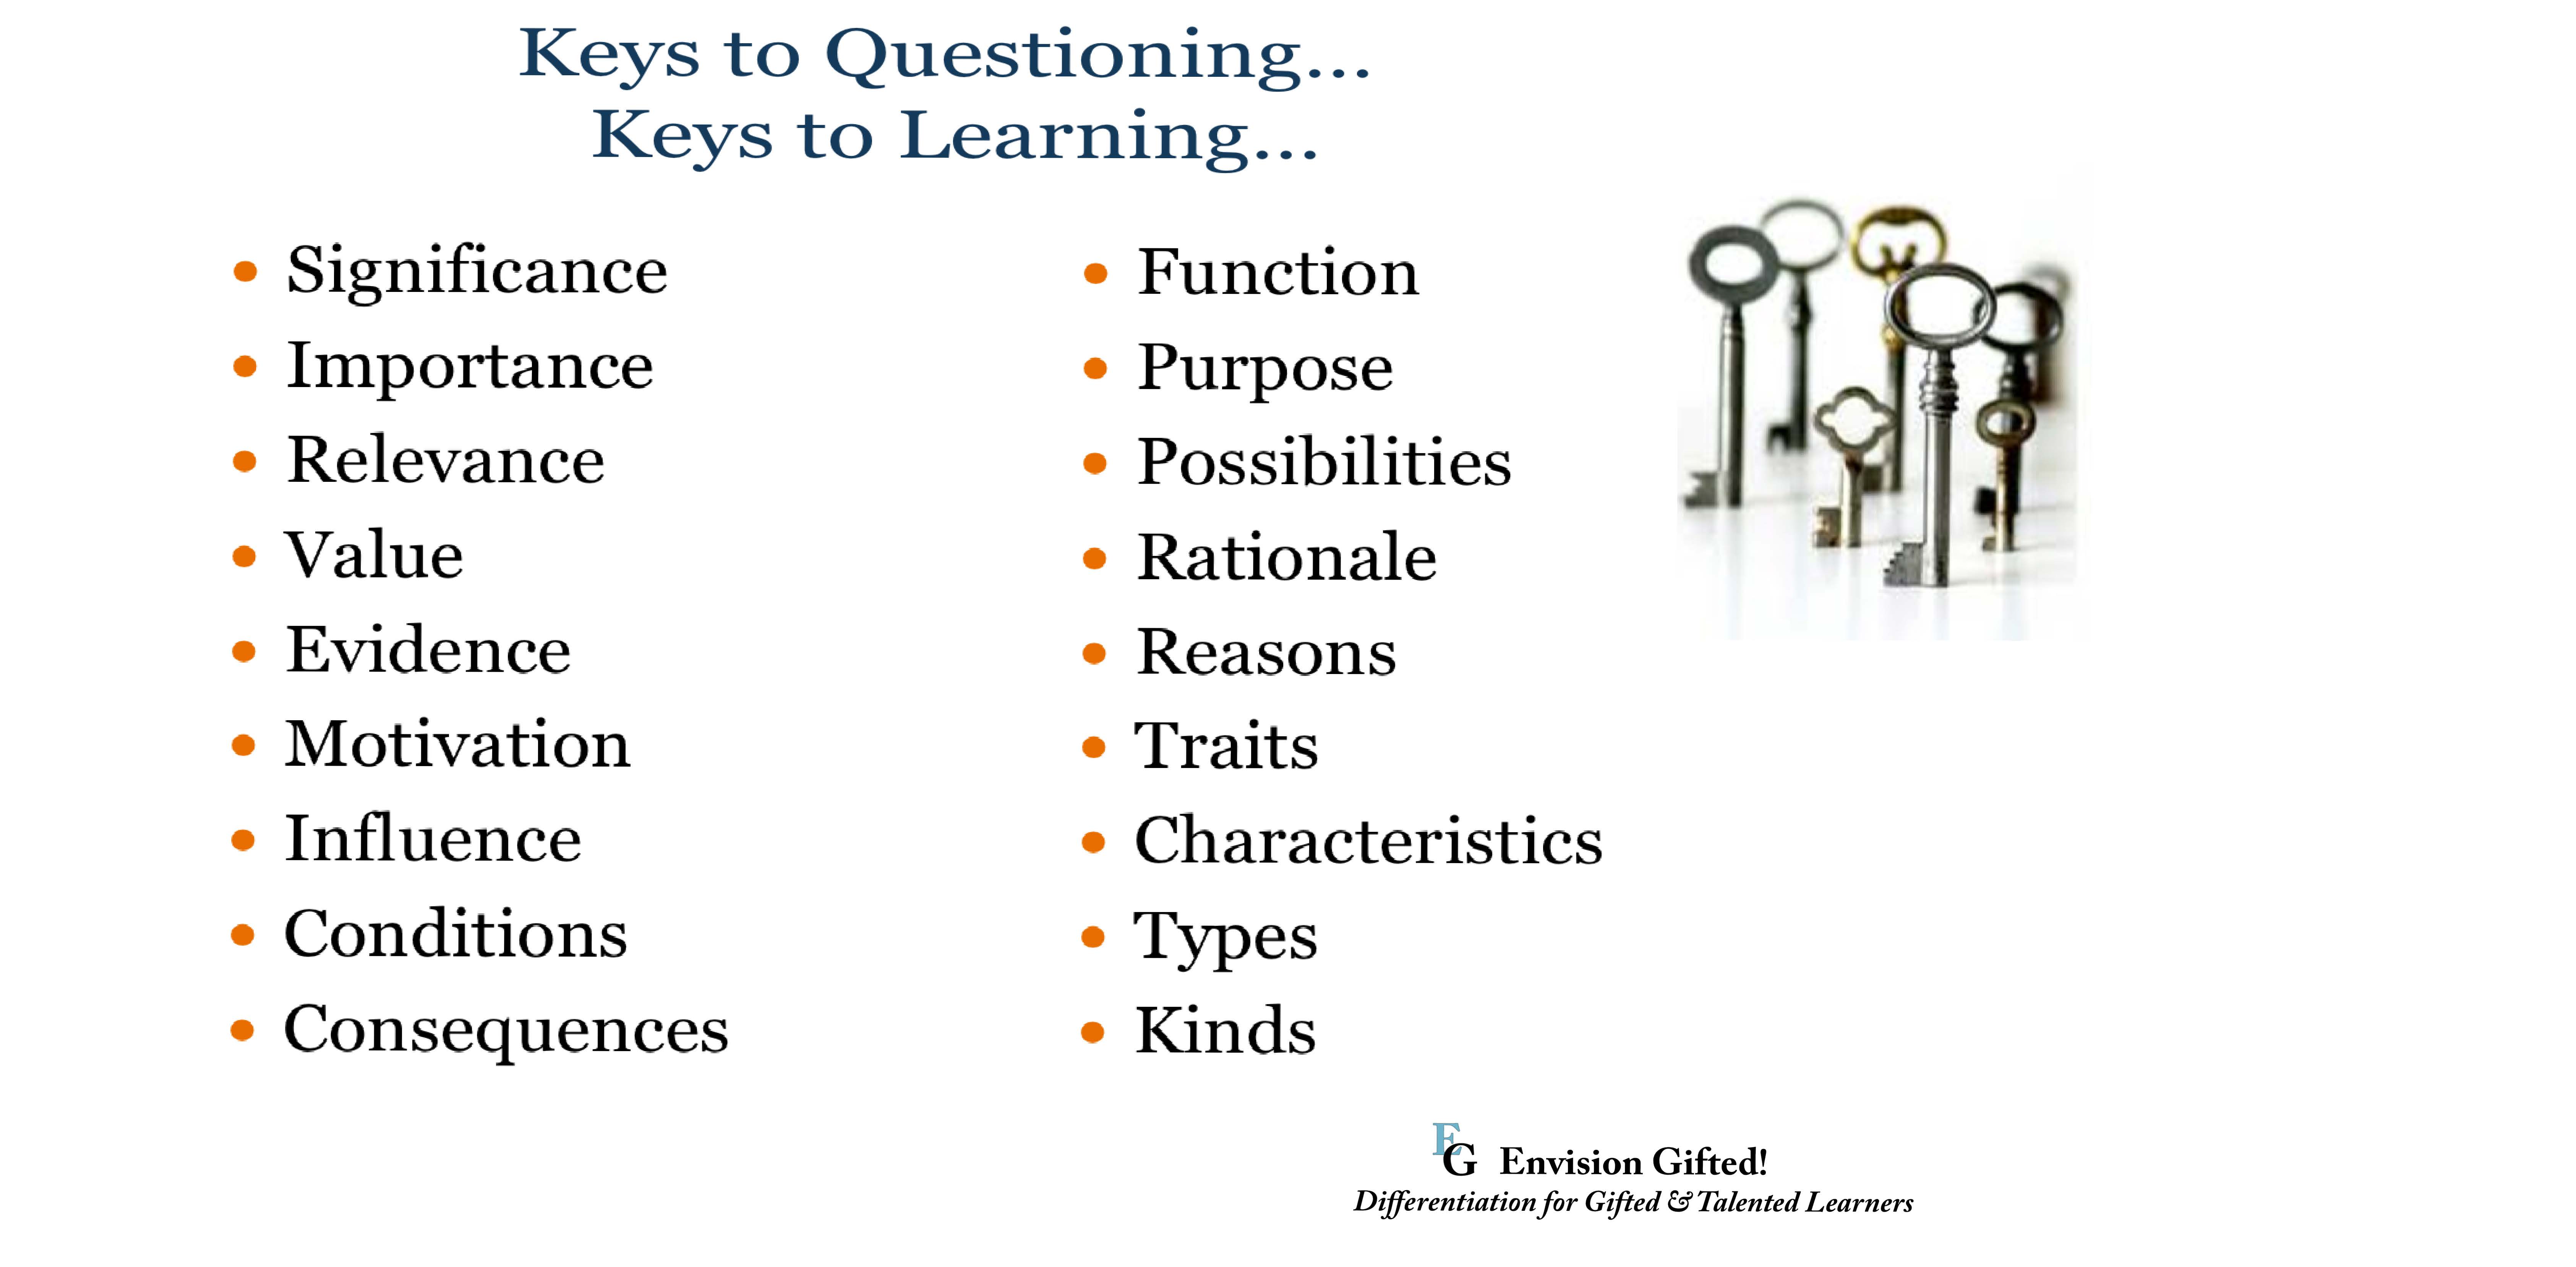 Keys to Learning Language Arts. Envision Gifted